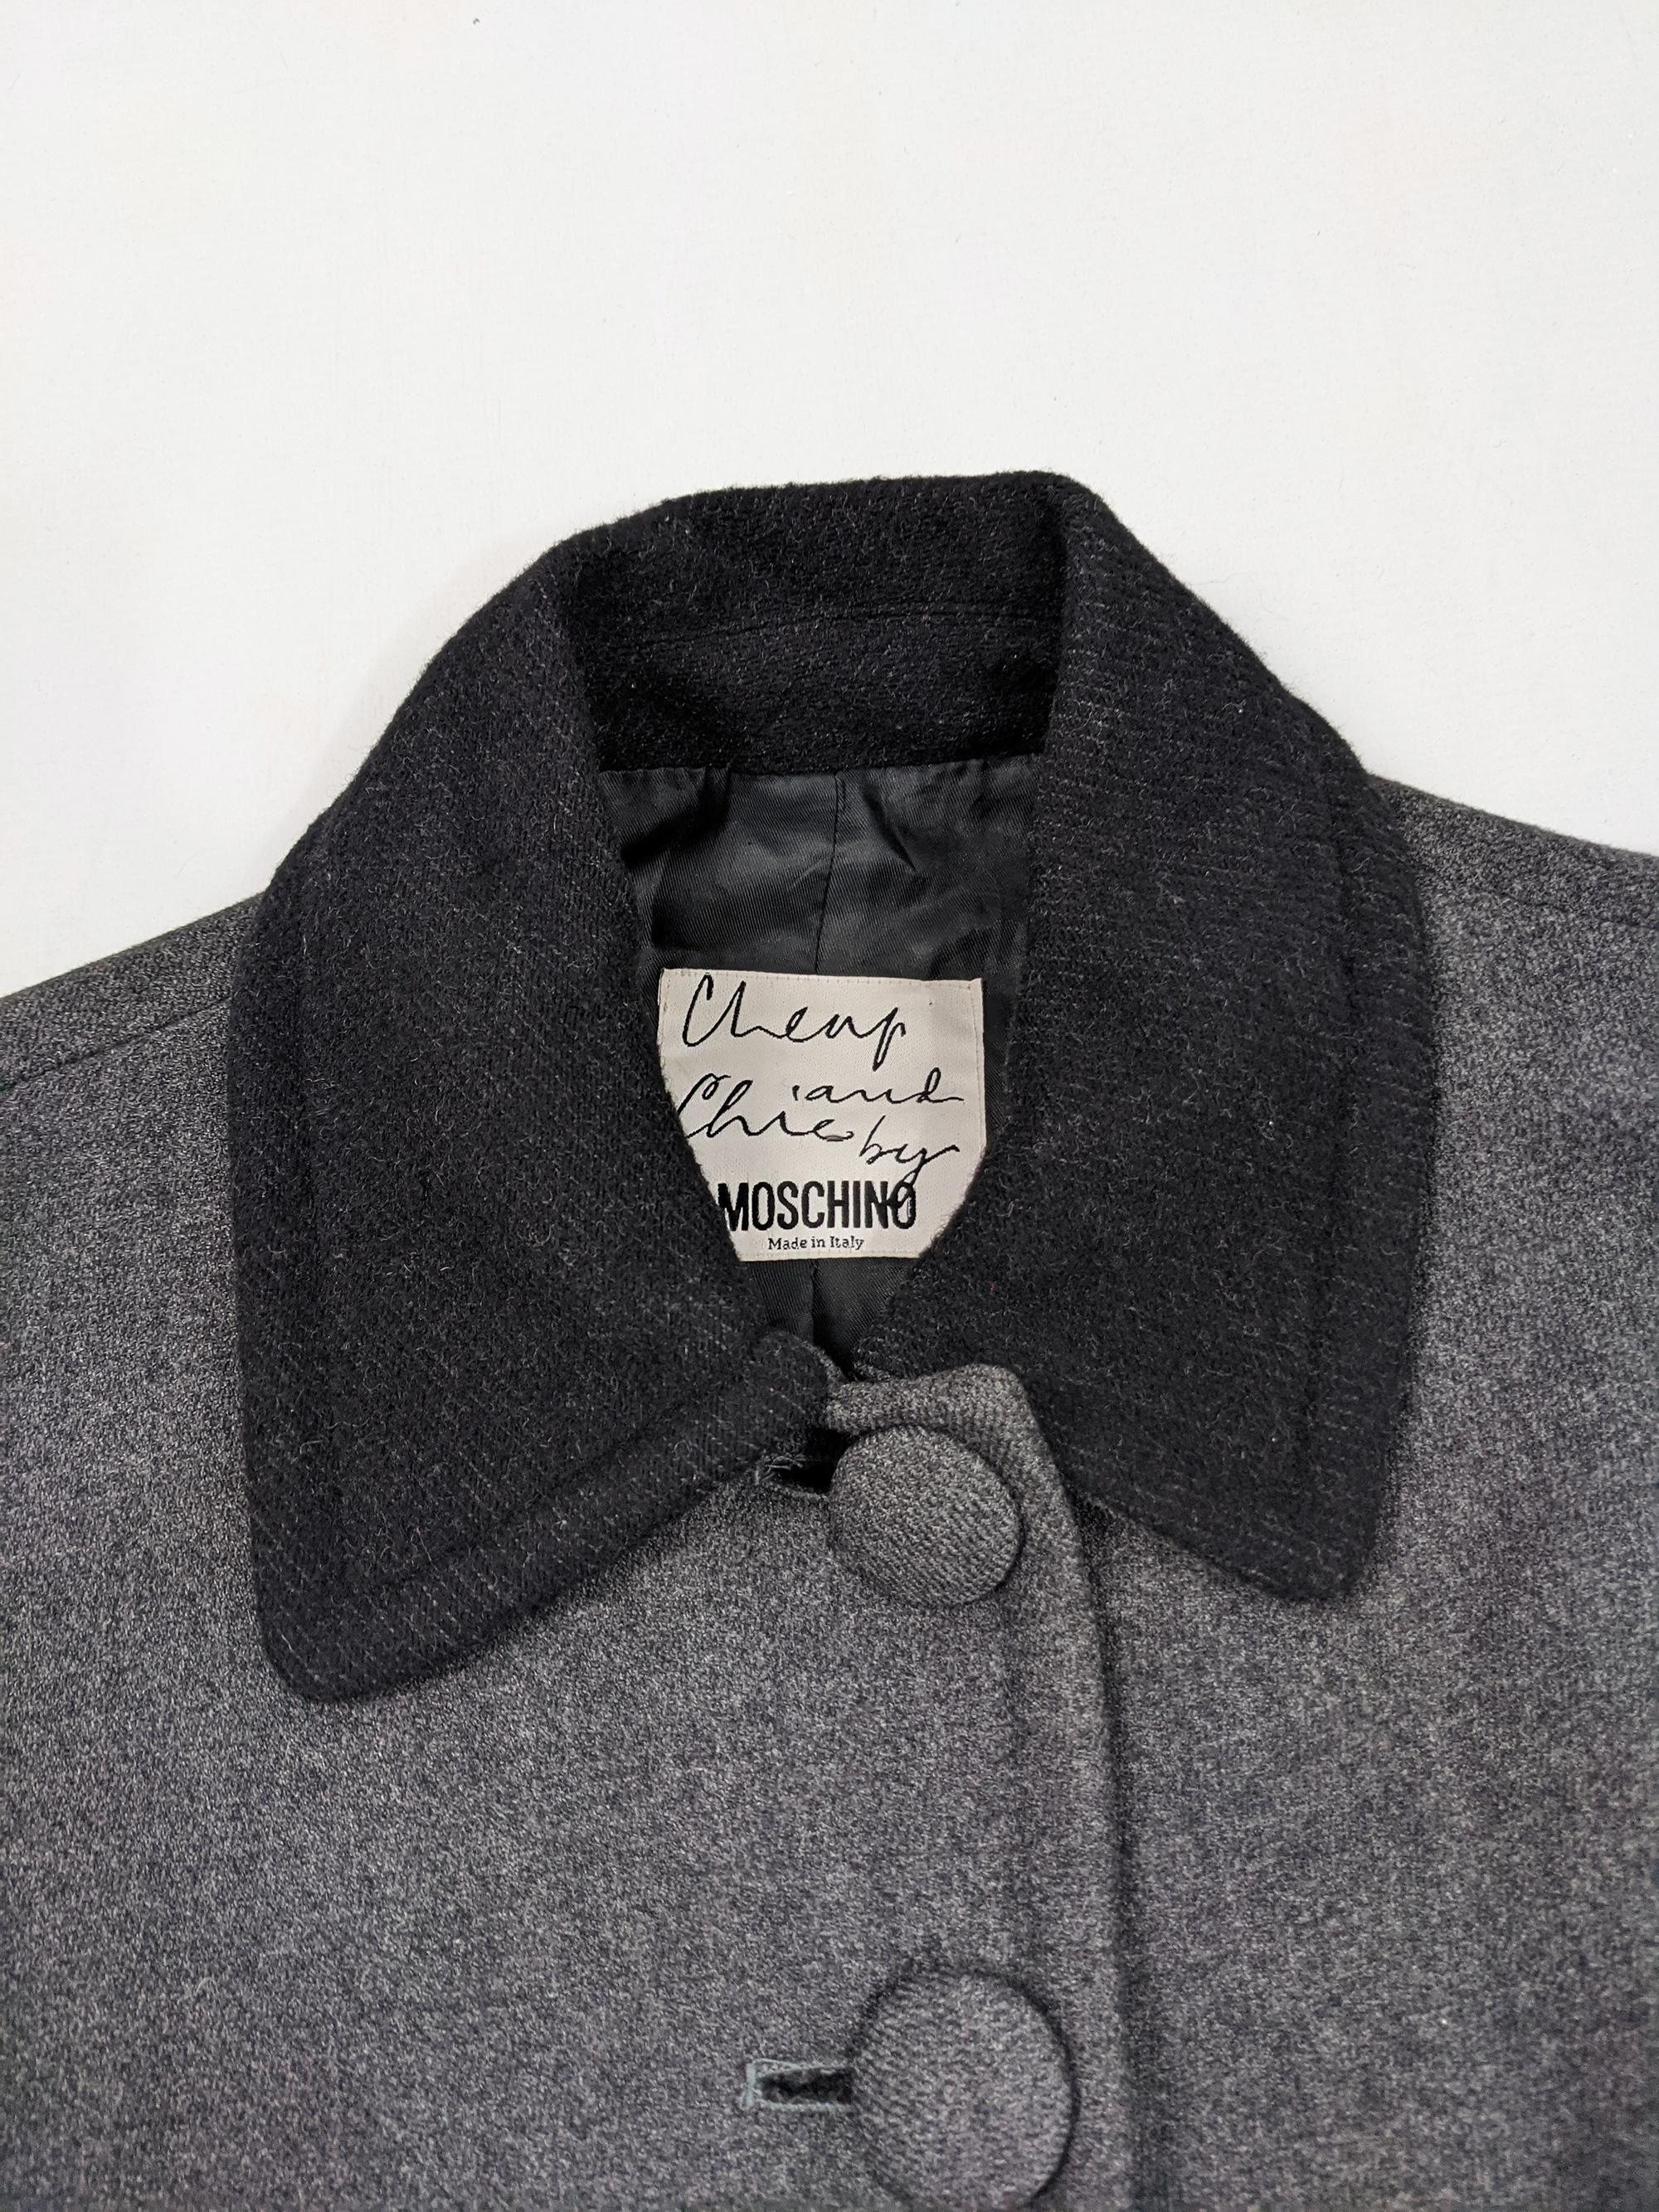 Moschino Vintage Wool Coat For Sale 2